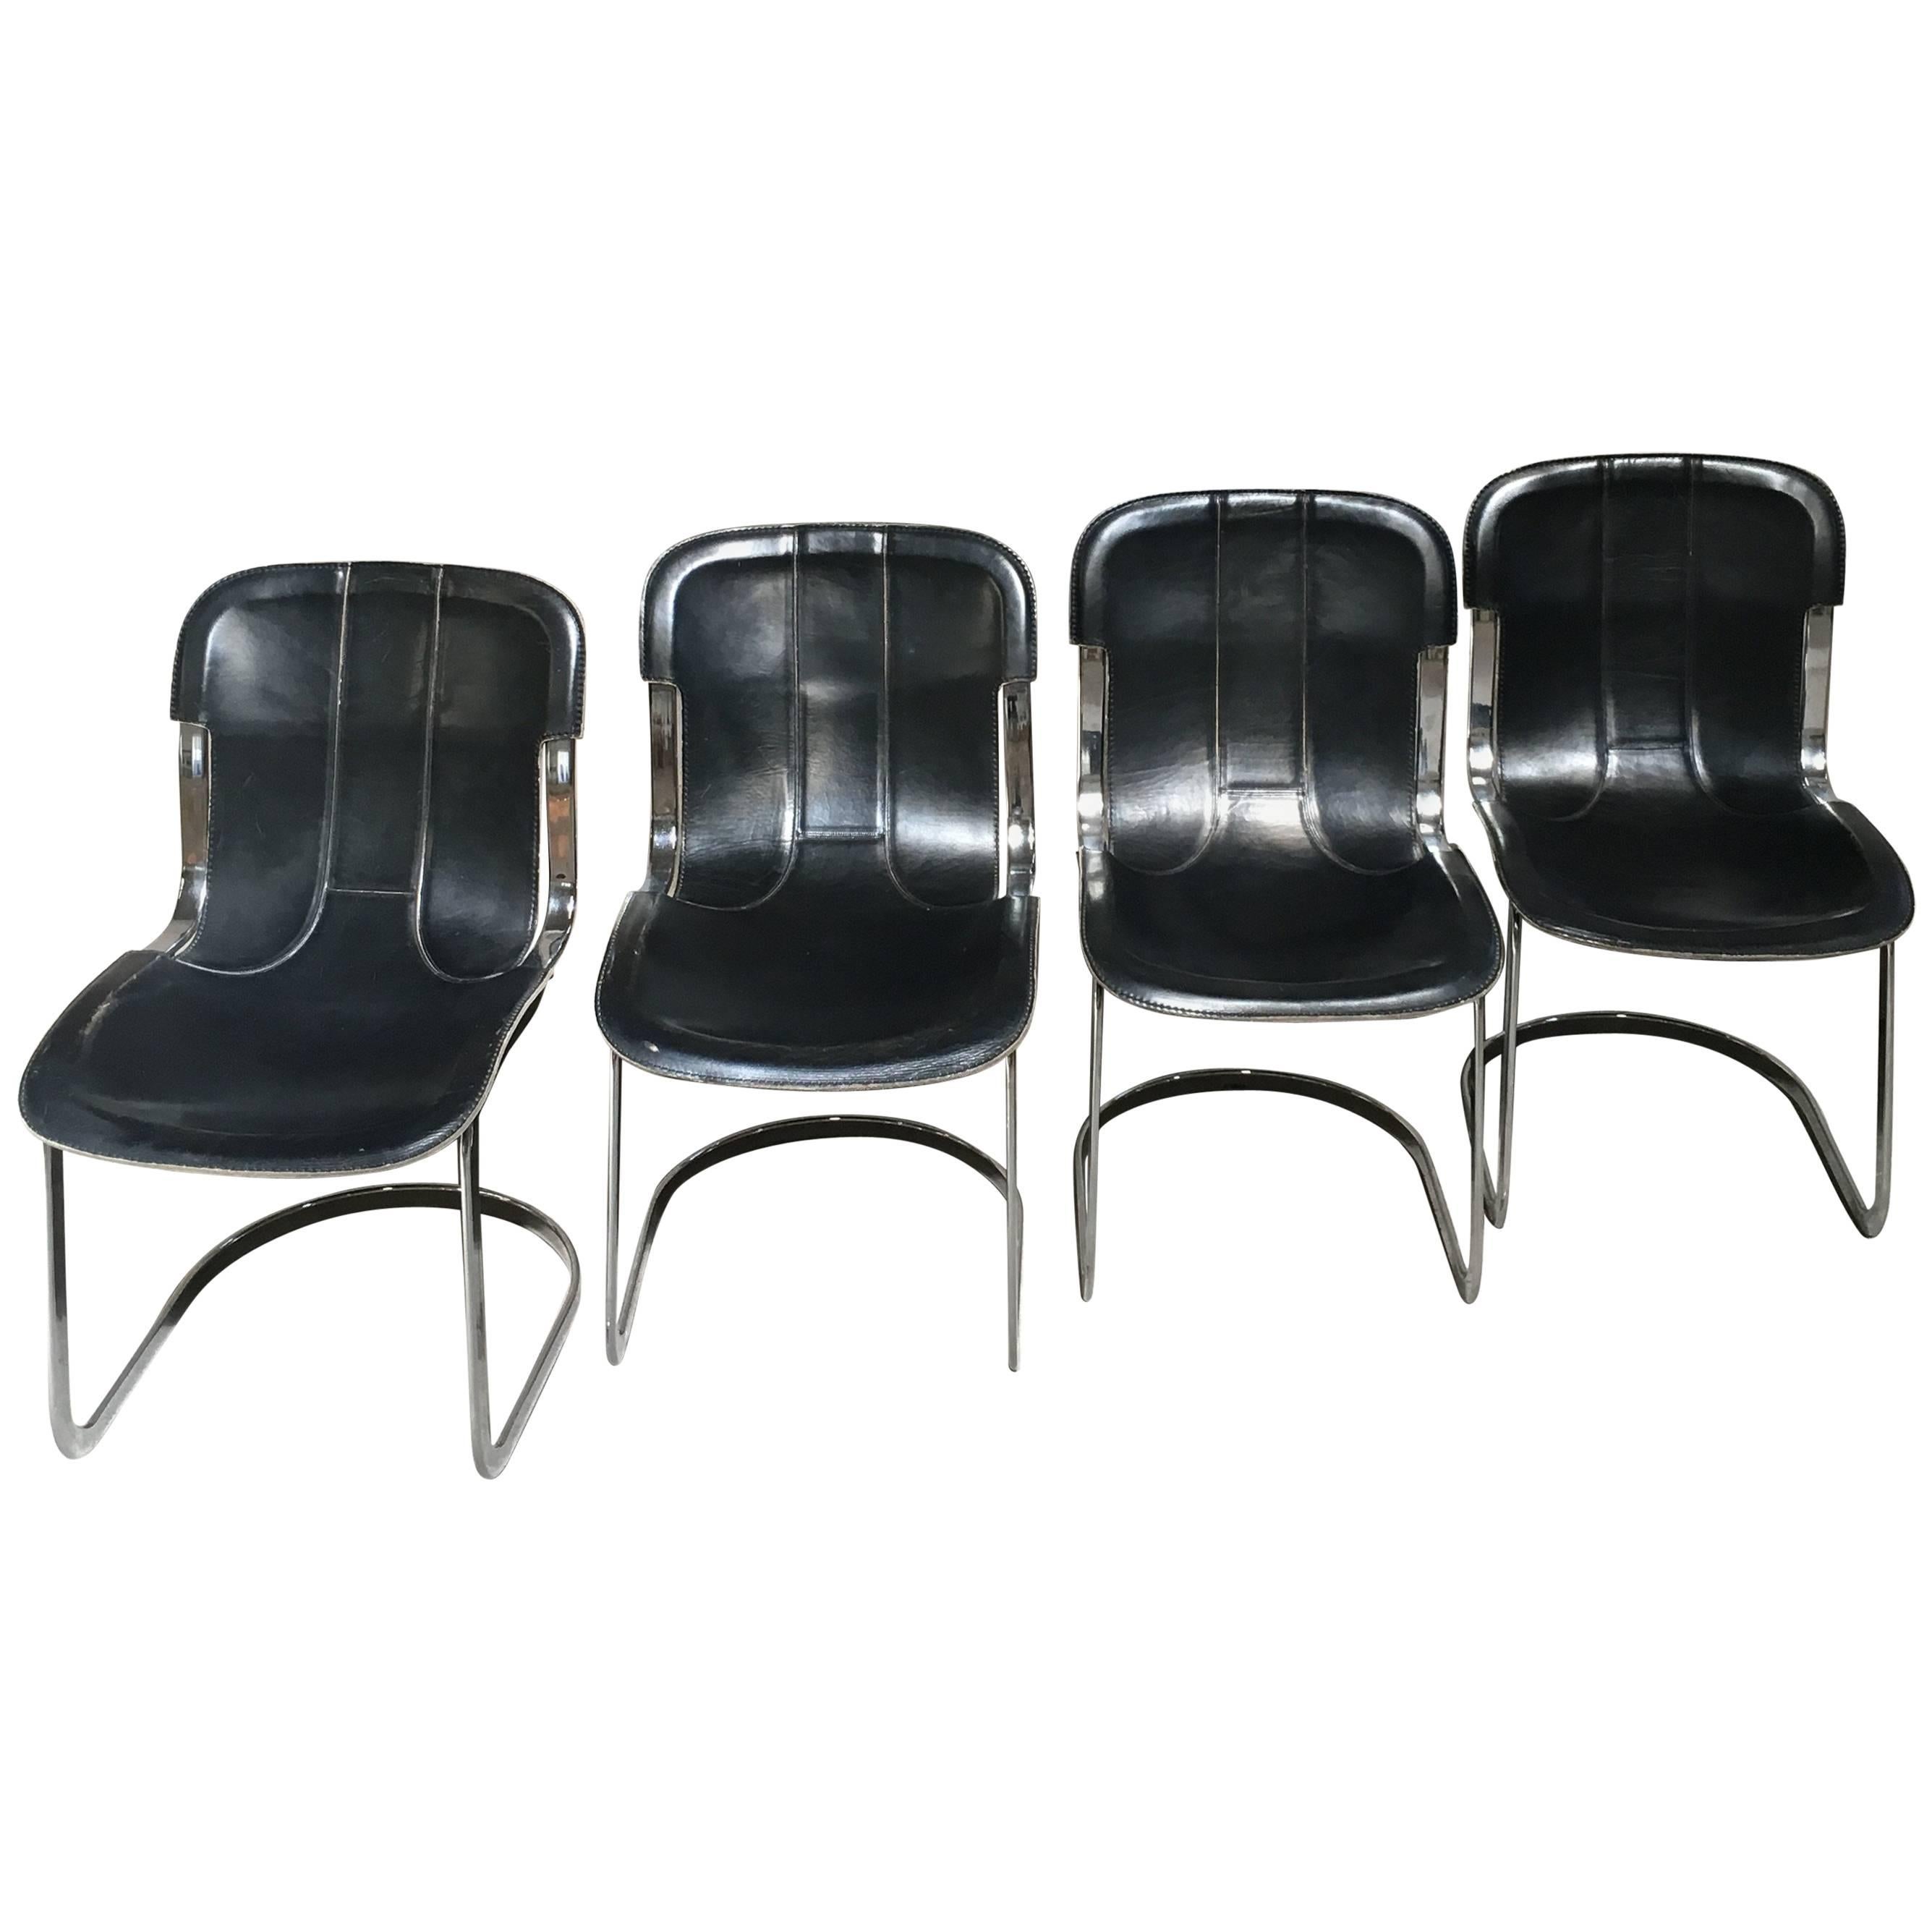 Four Italian Chairs with Original Black Leather Seat by Willy Rizzo for Cidue